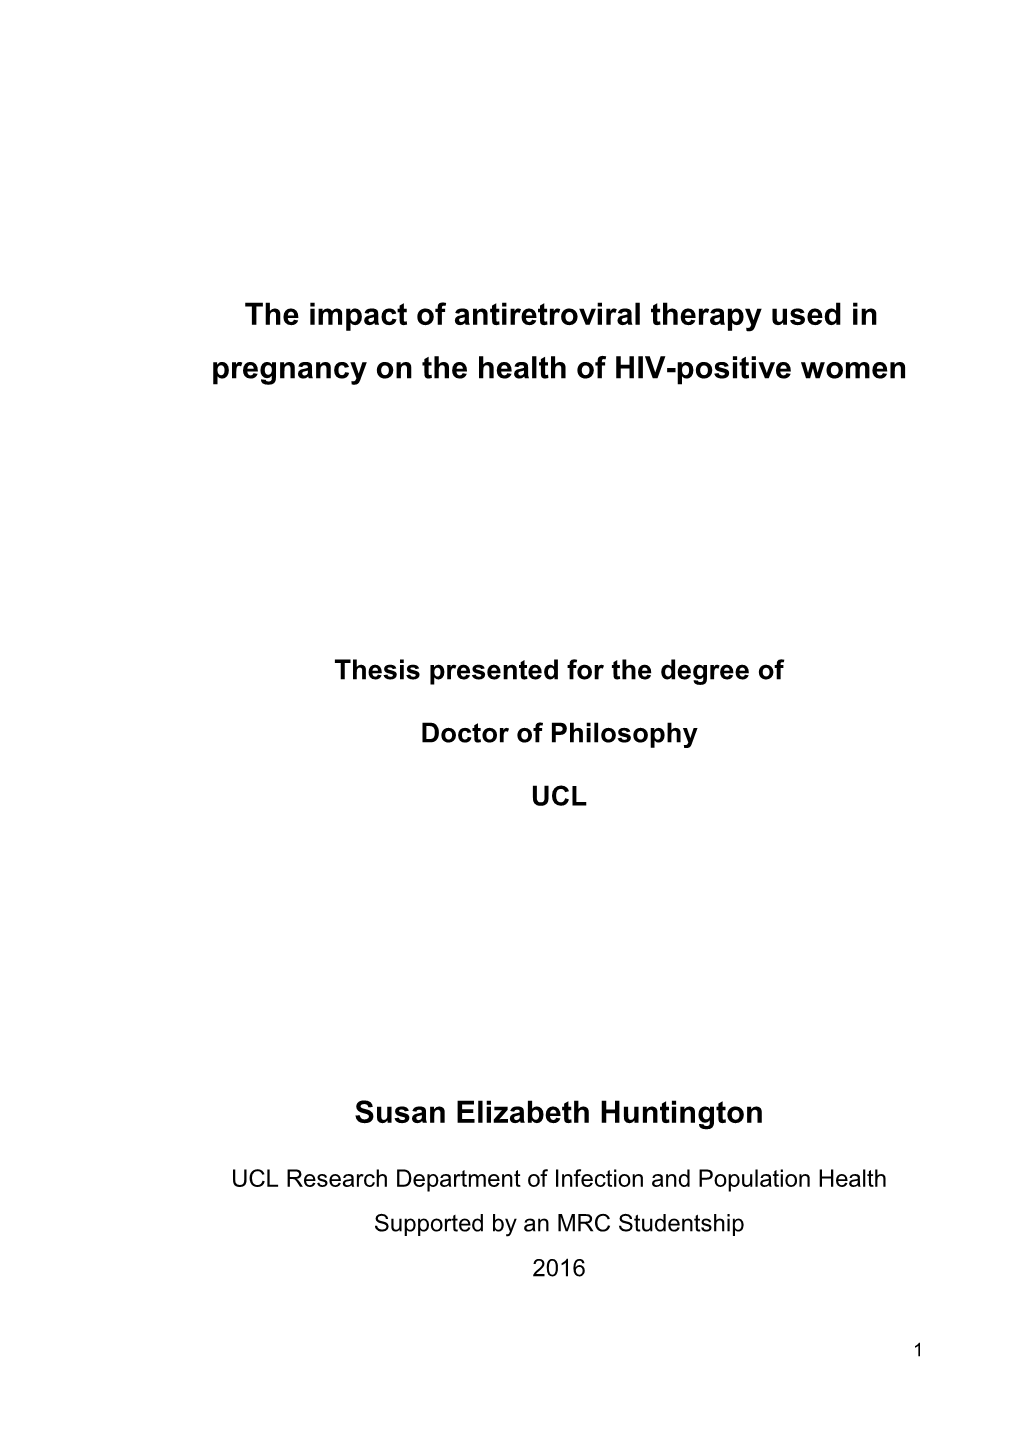 The Impact of Antiretroviral Therapy Used in Pregnancy on the Health of HIV-Positive Women